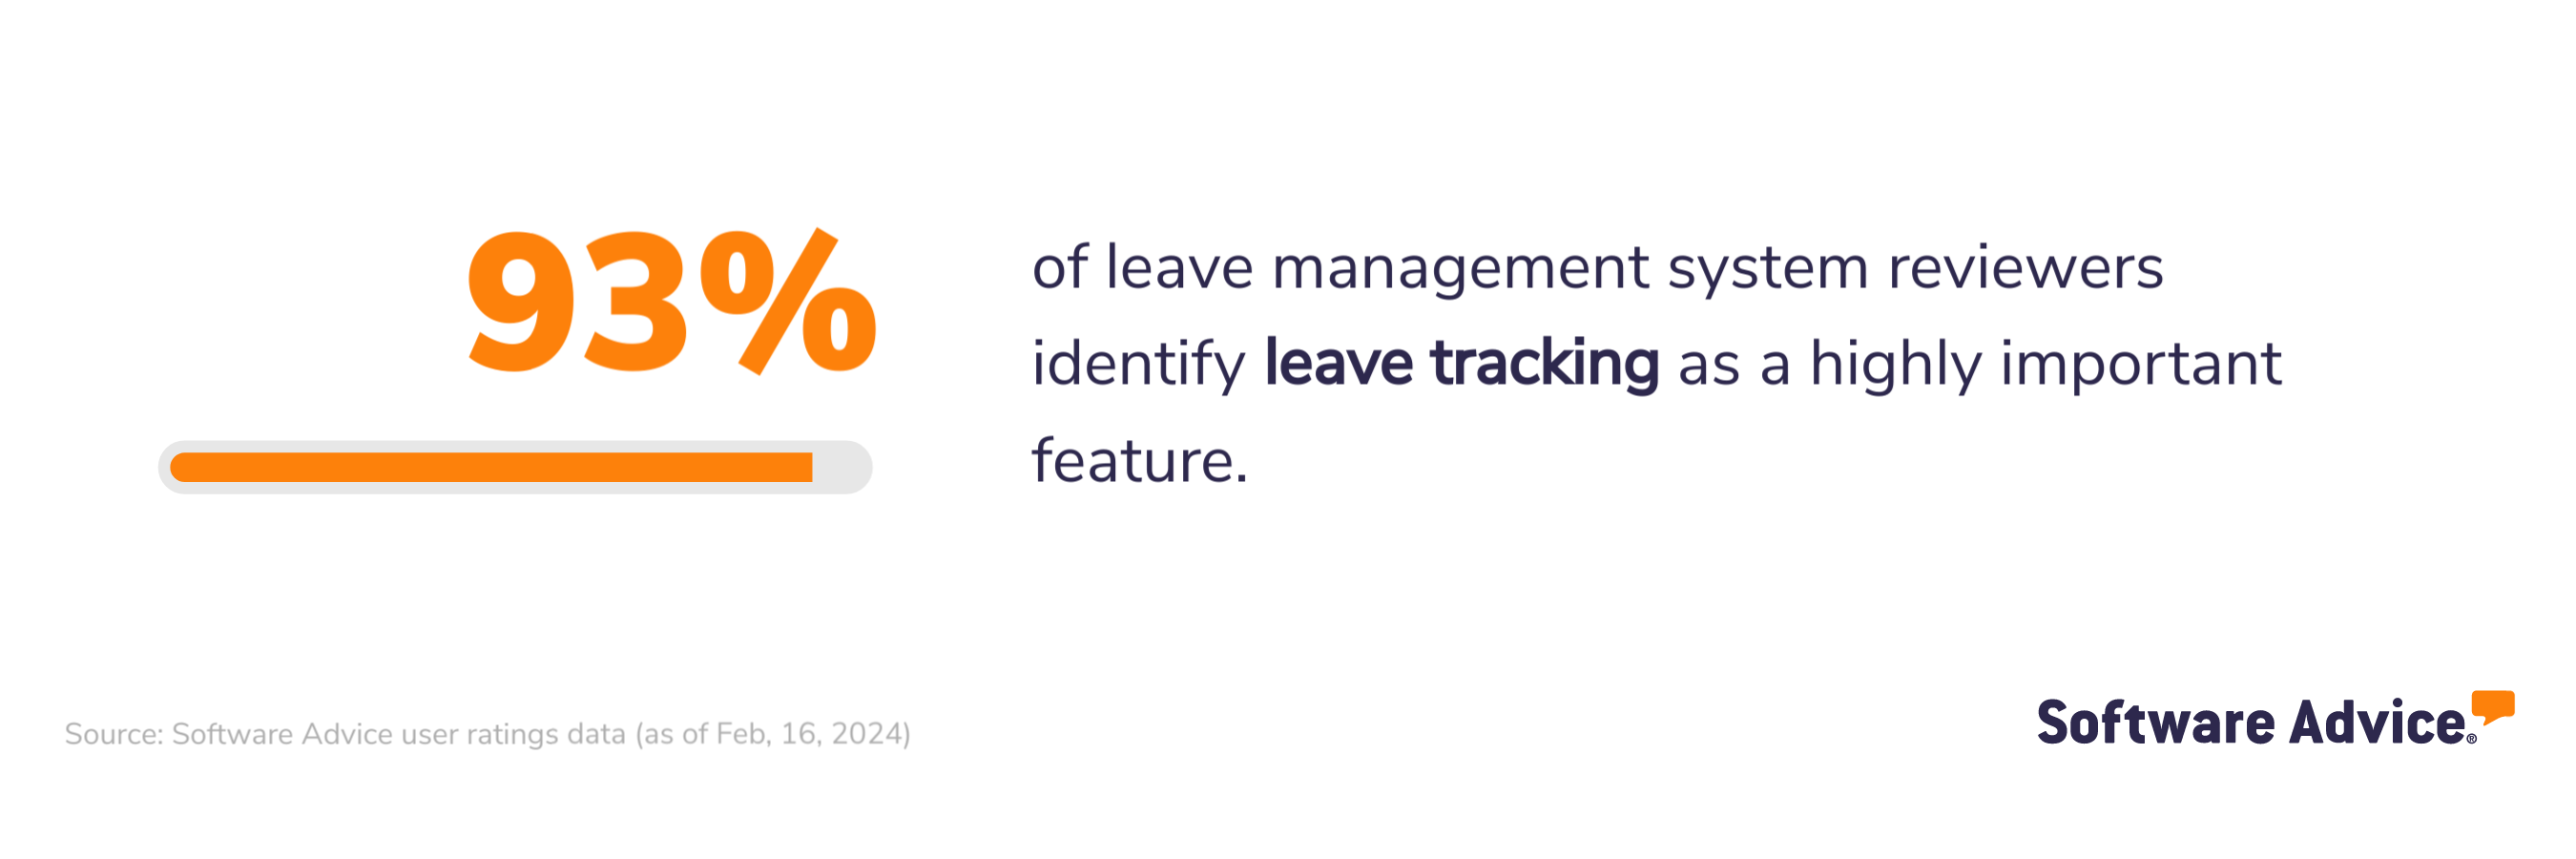 93% of leave management system reviewers identify leave tracking as a highly important feature.